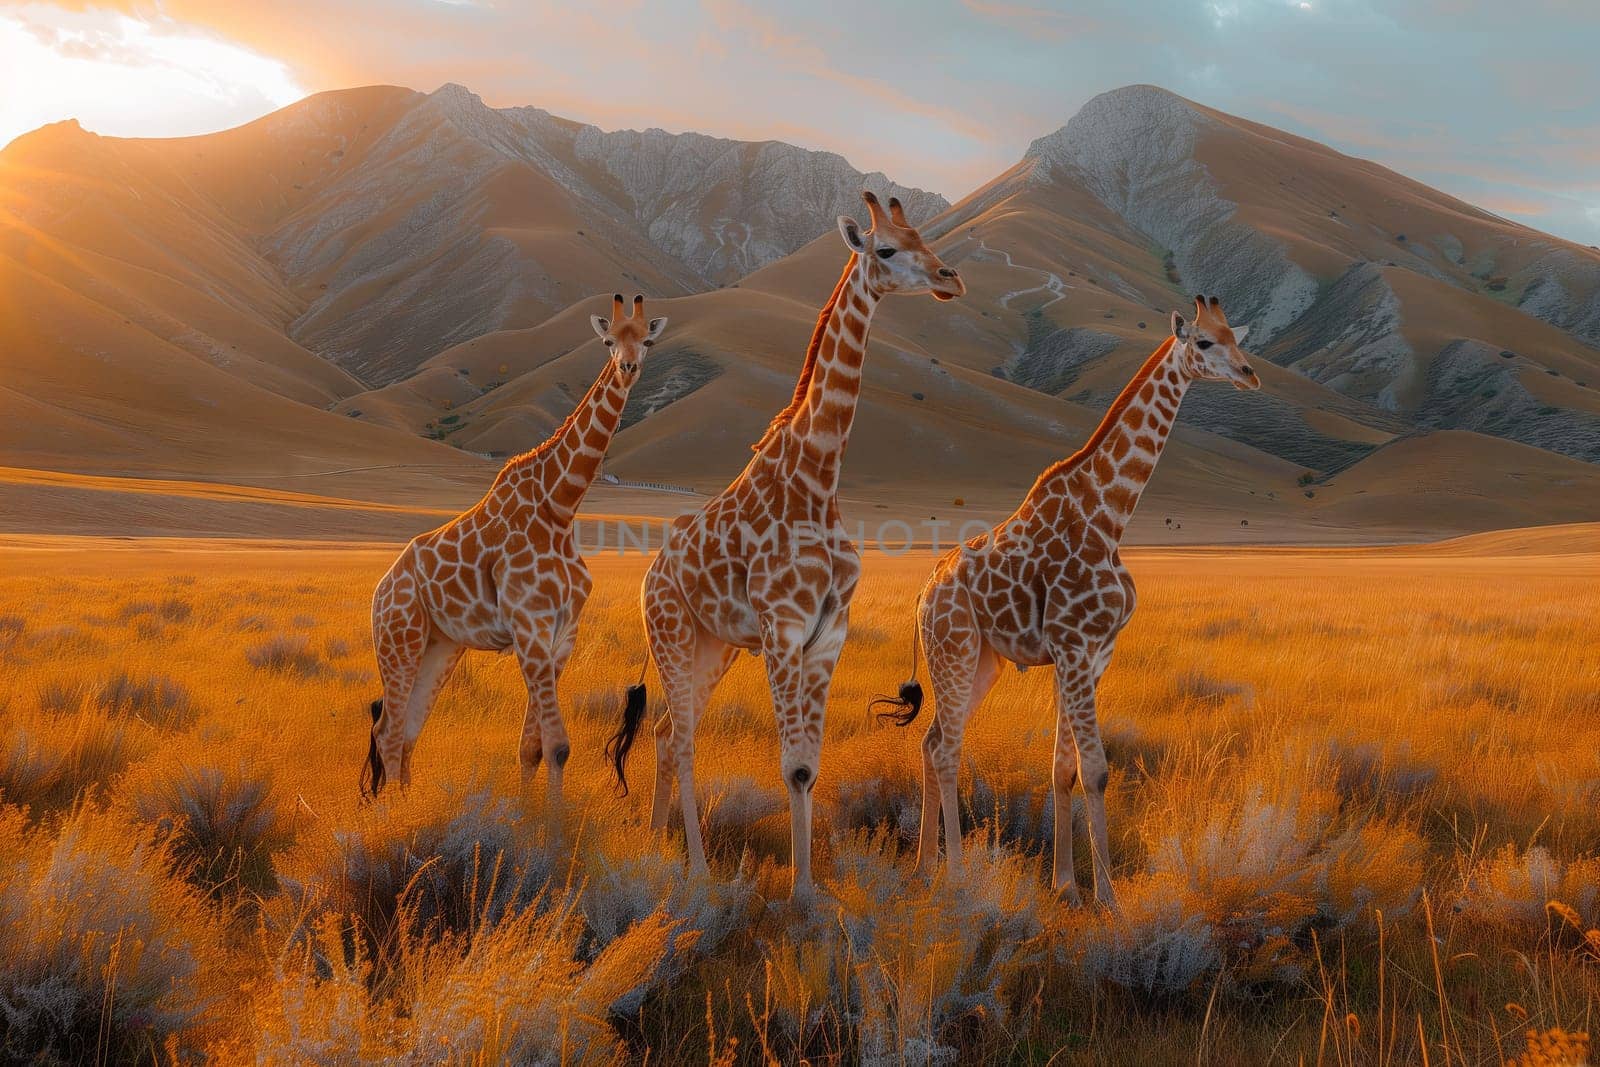 Three Giraffidae in plant community with mountains backdrop by richwolf